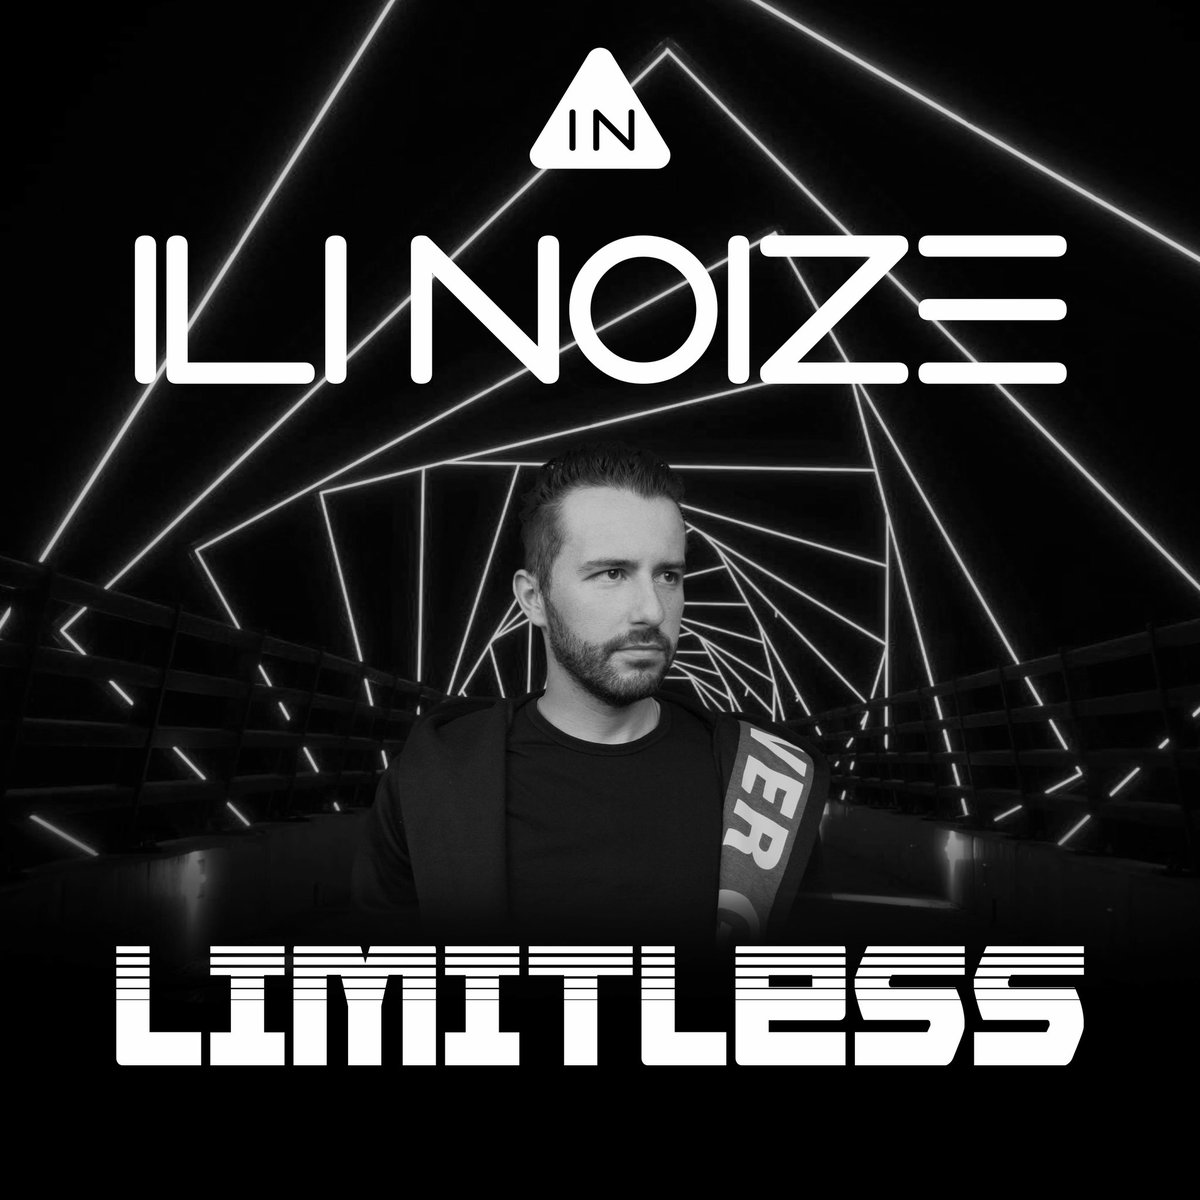 *** LIMITLESS *** now in stores!!! open.spotify.com/album/2yEZvXfT… Spotify, Deezer, iTunes and many more #limitless #music #genre #song #newsong #techno #edm #techhouse #listentothis #goodmusic #ilinoize